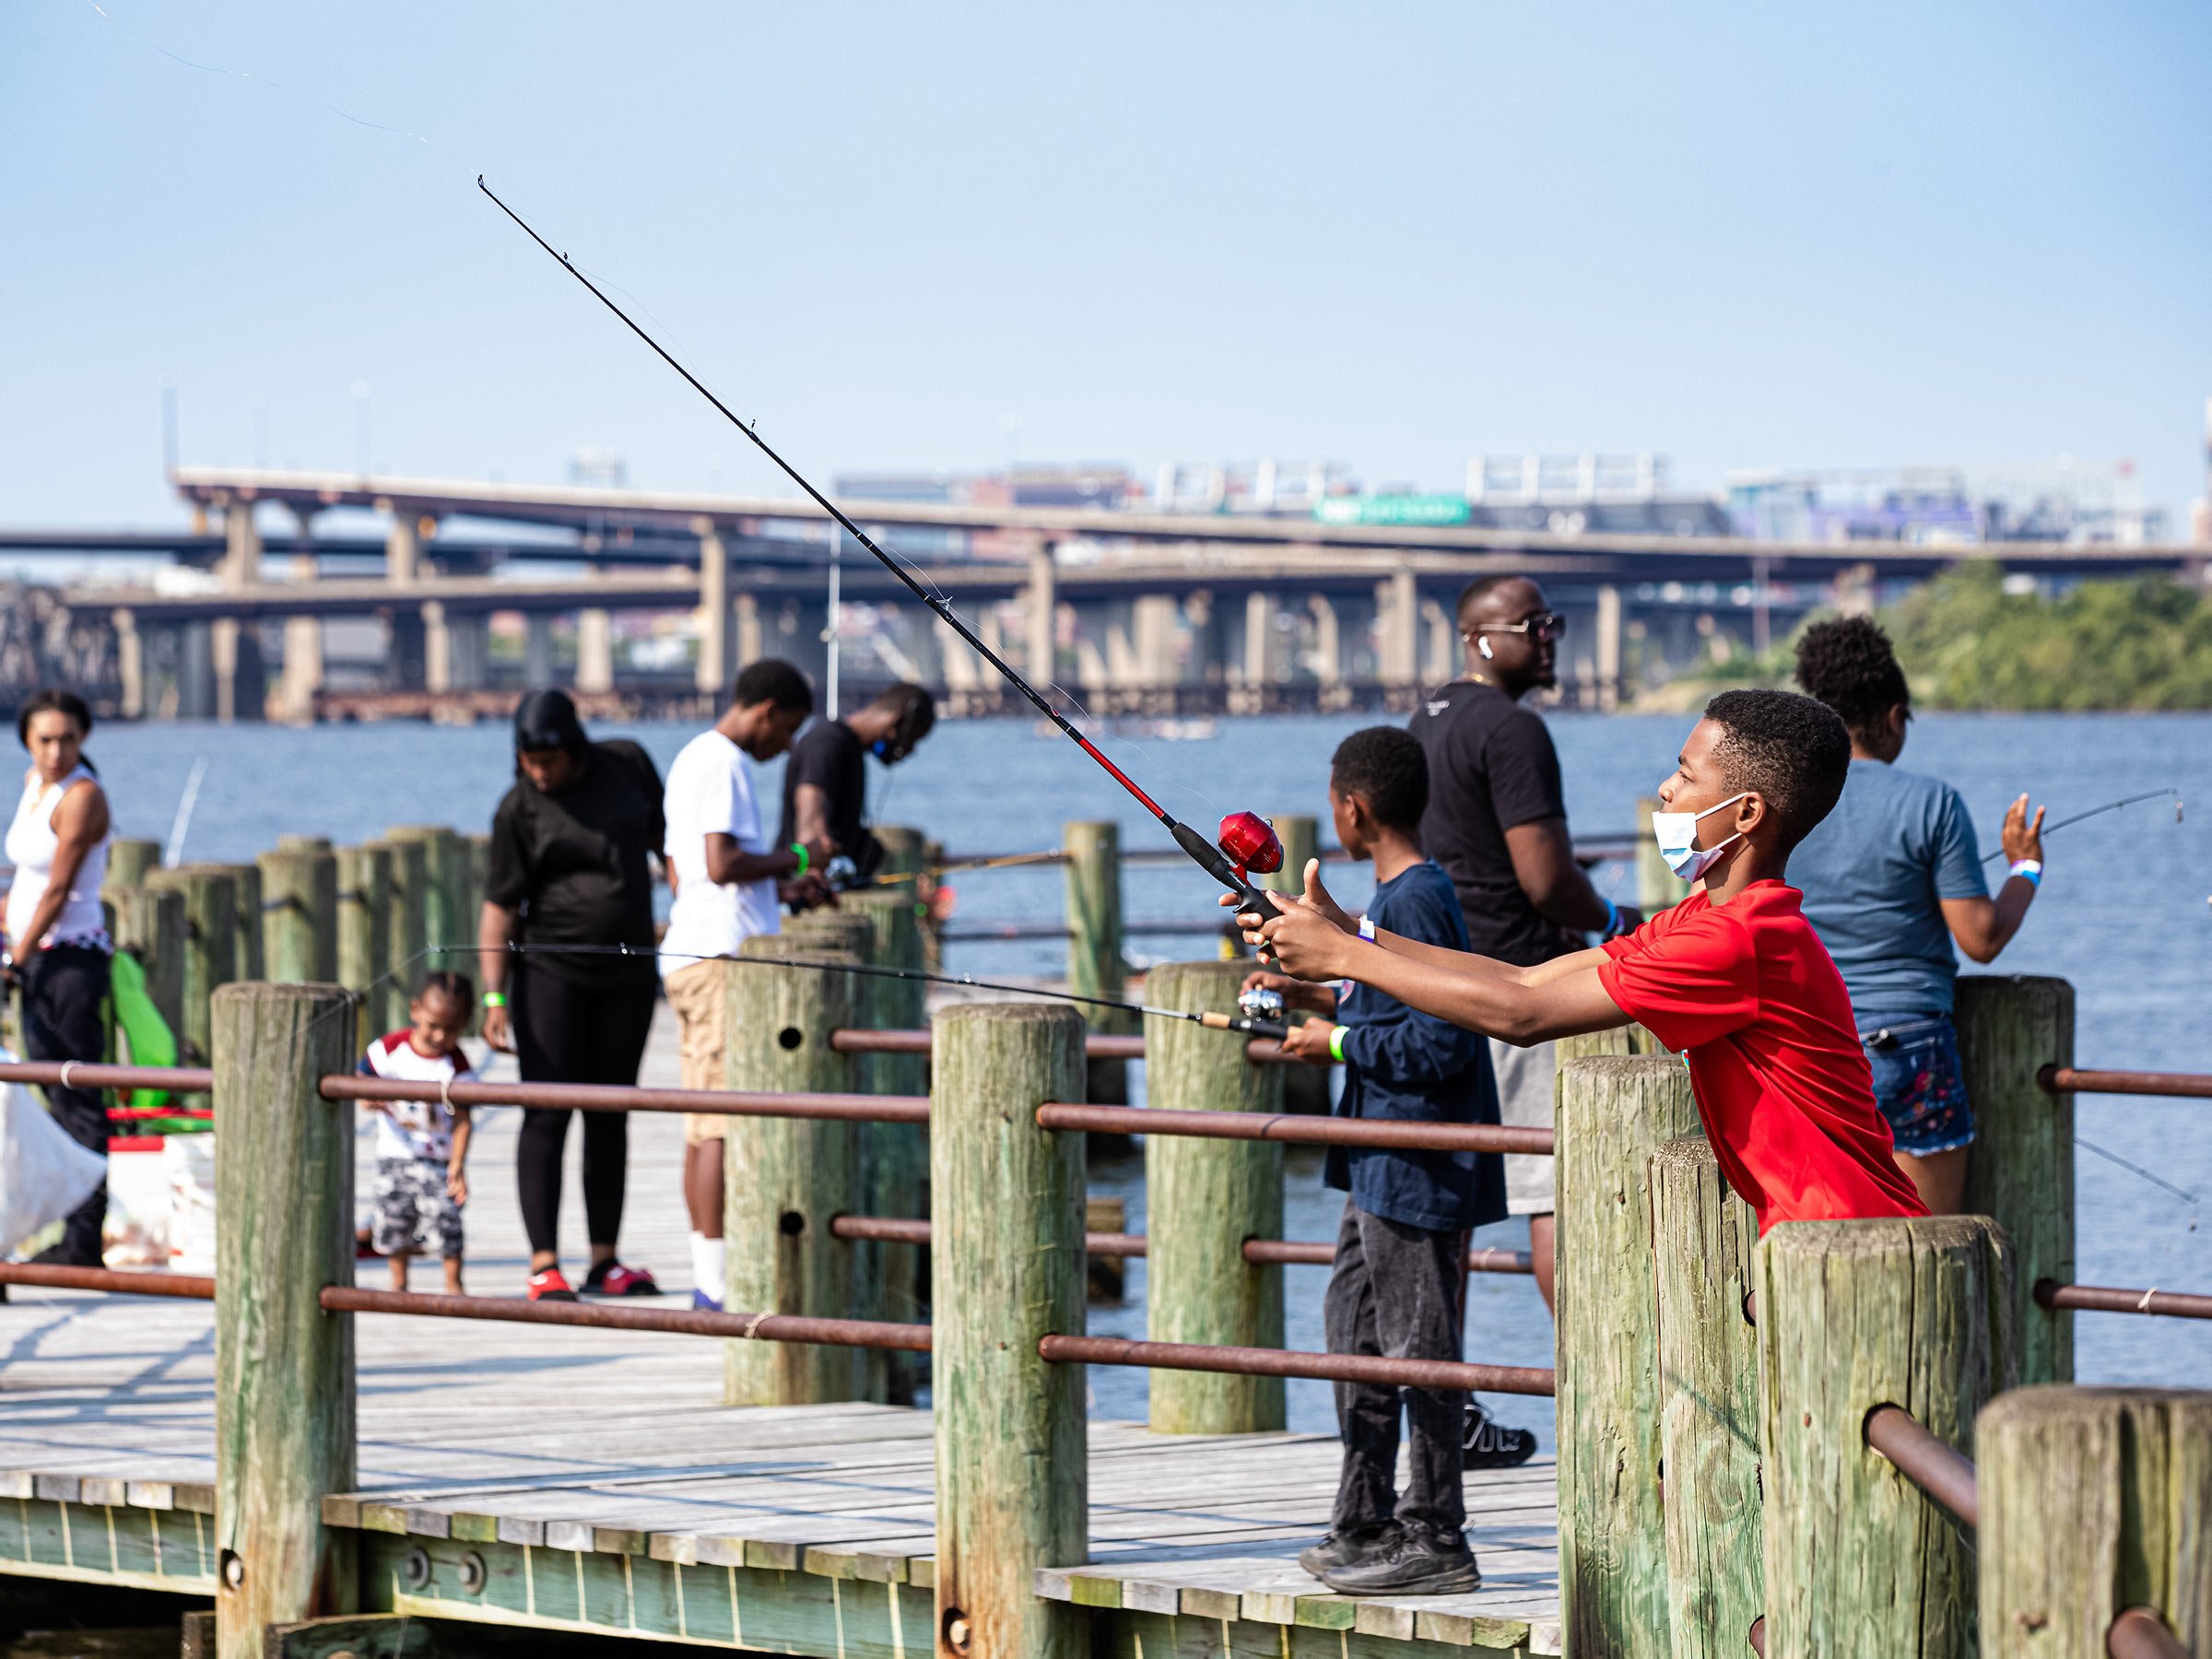  A dozen residents on pier, with boy in foreground using fishing pole 